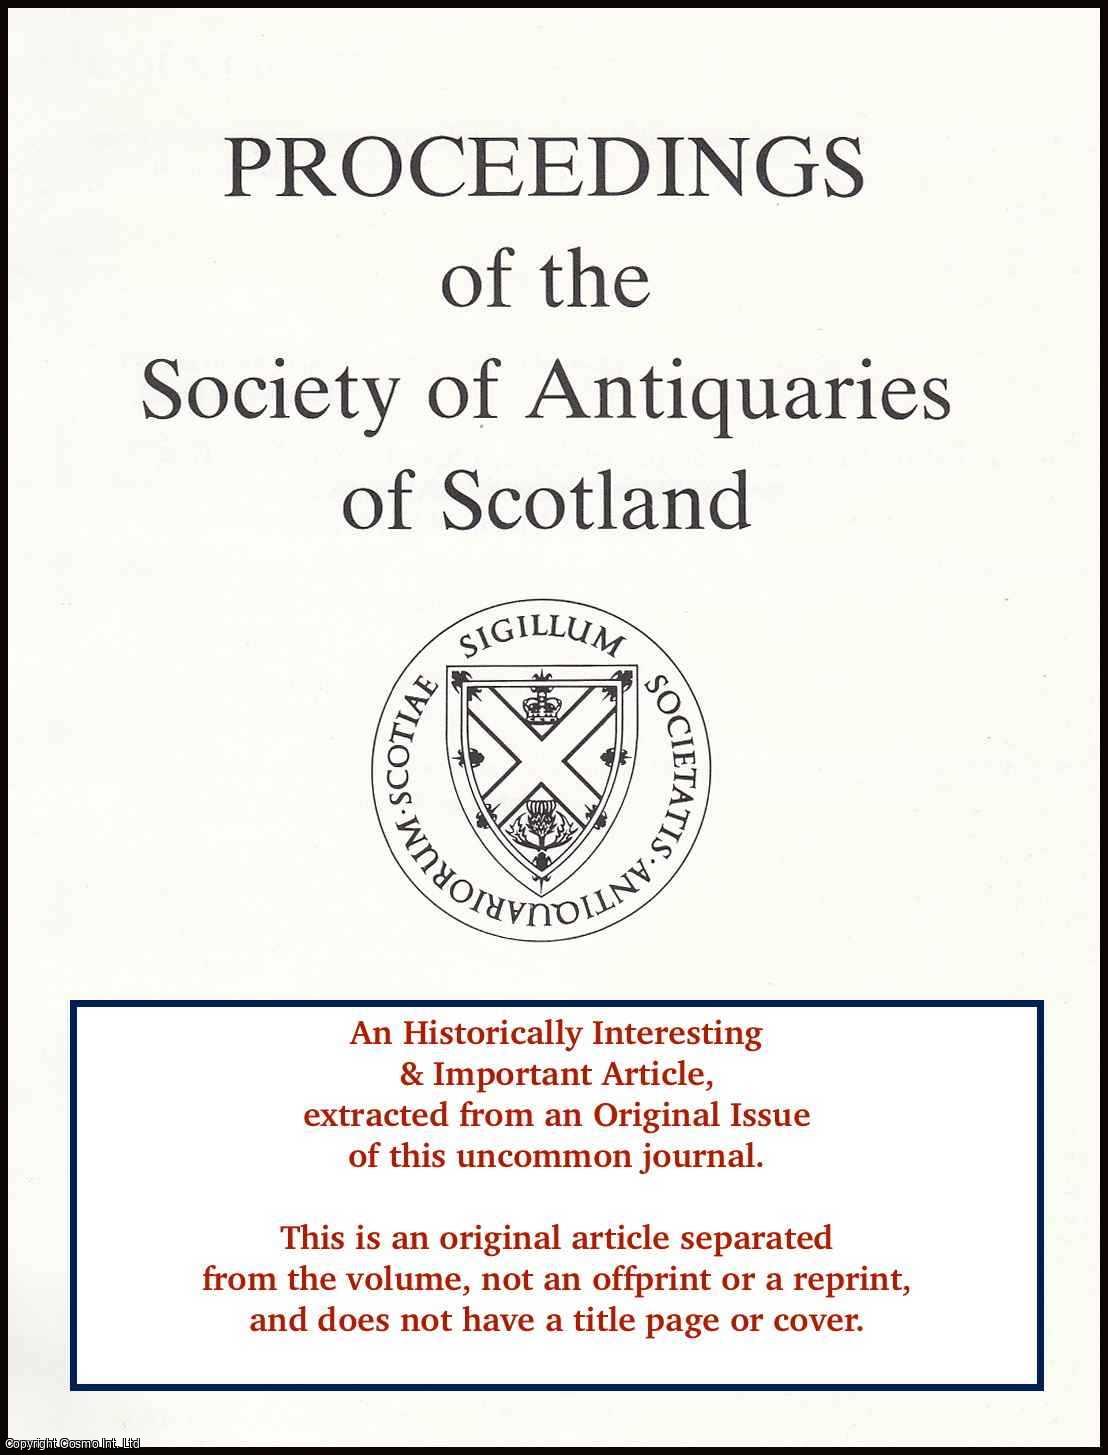 Ian B.D. Bryce & Alasdair Roberts - Post-Reformation Catholic Houses of North-East Scotland. An original article from the Proceedings of the Society of Antiquaries of Scotland, 1993.